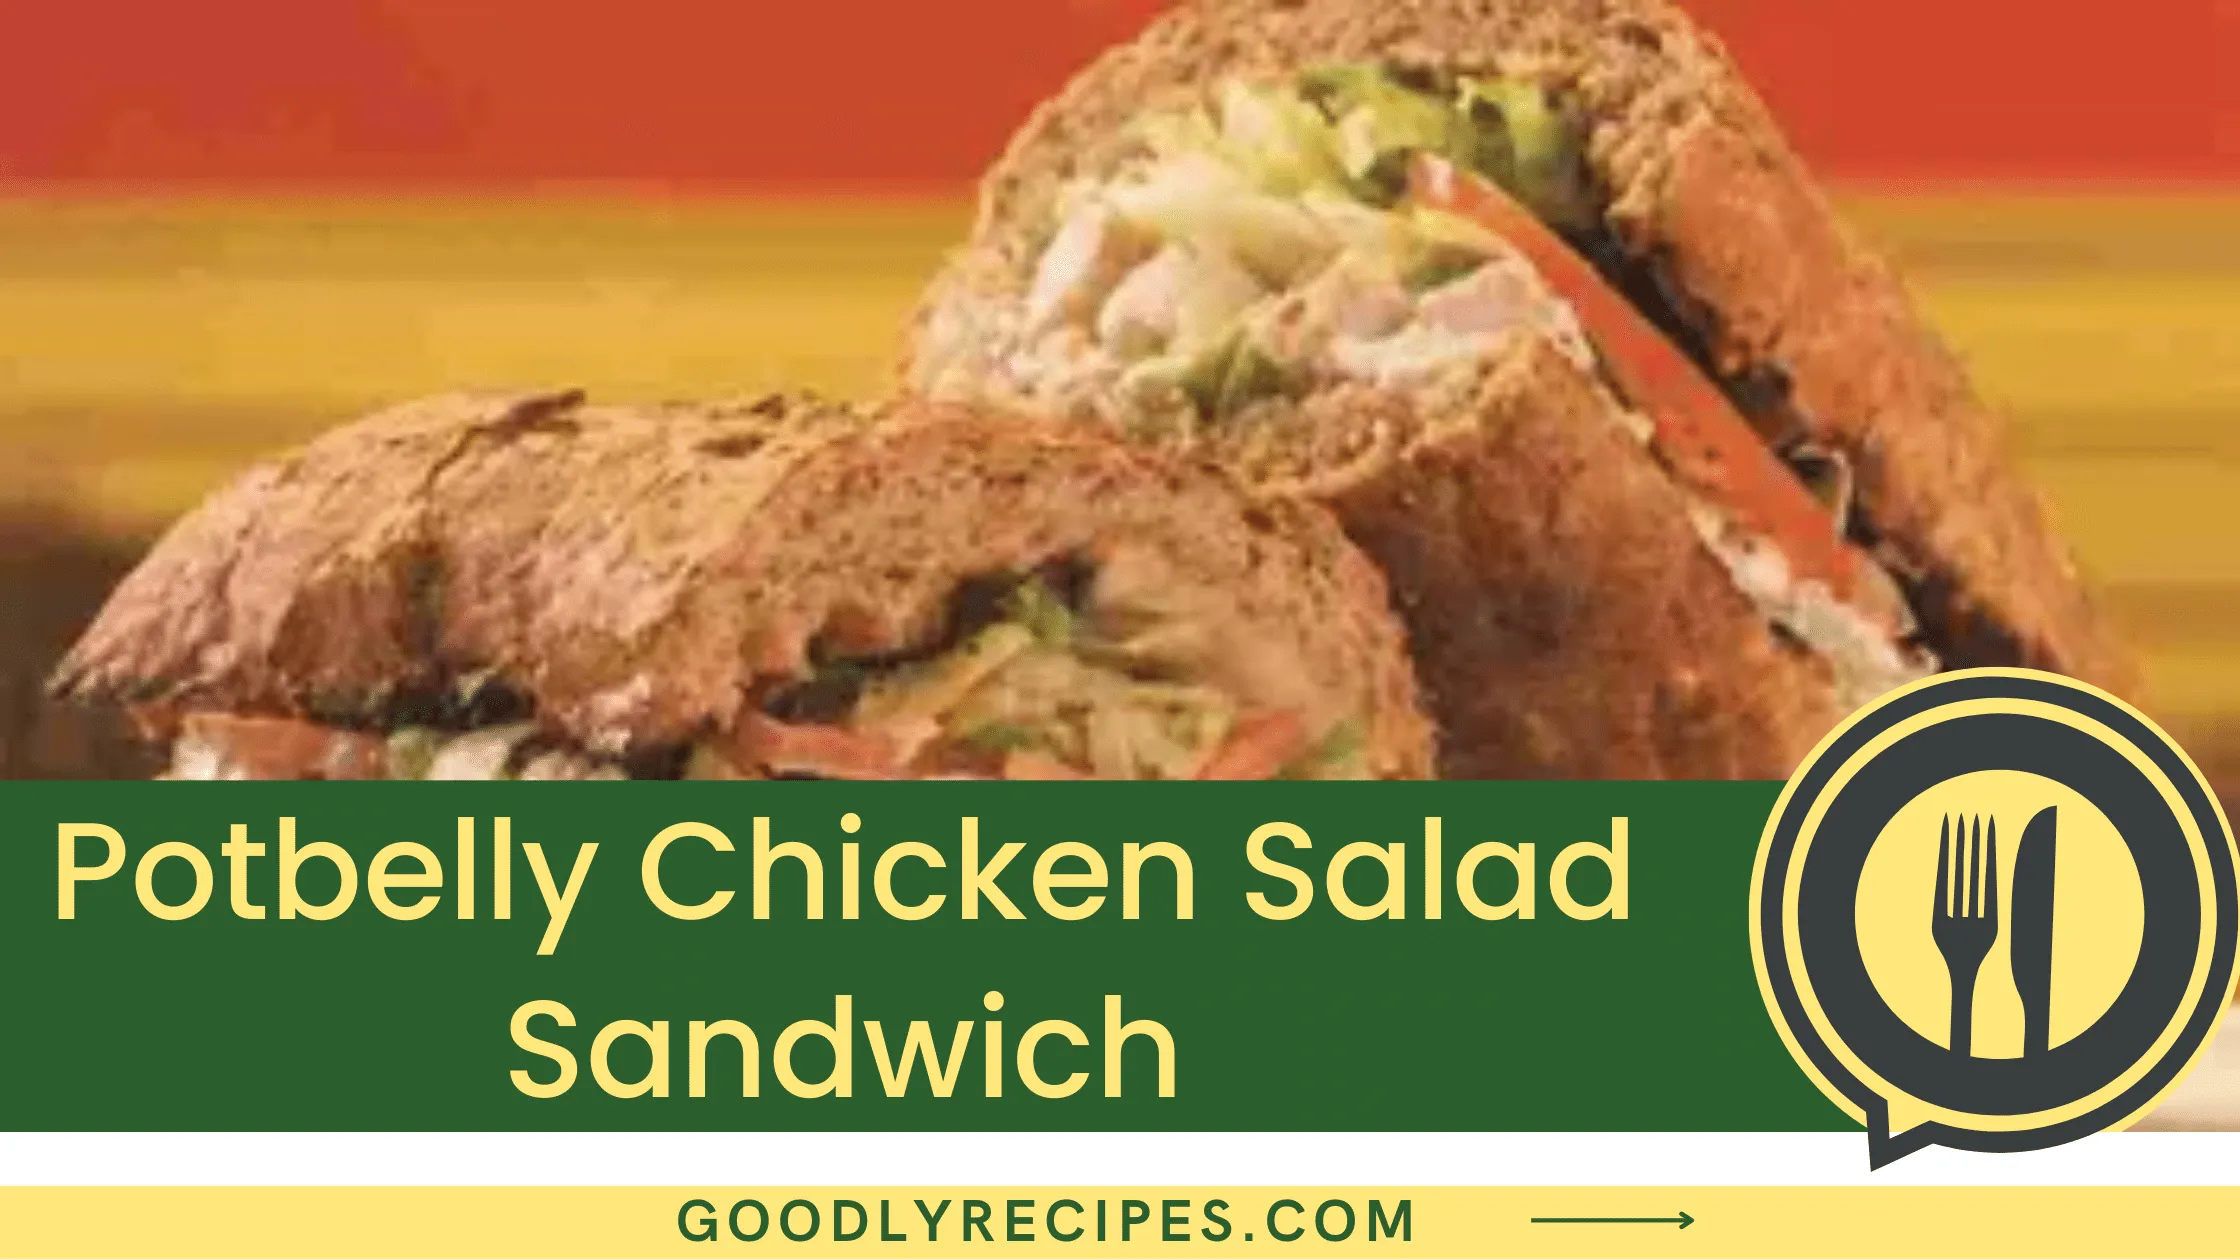 What is Potbelly Chicken Salad Sandwich?